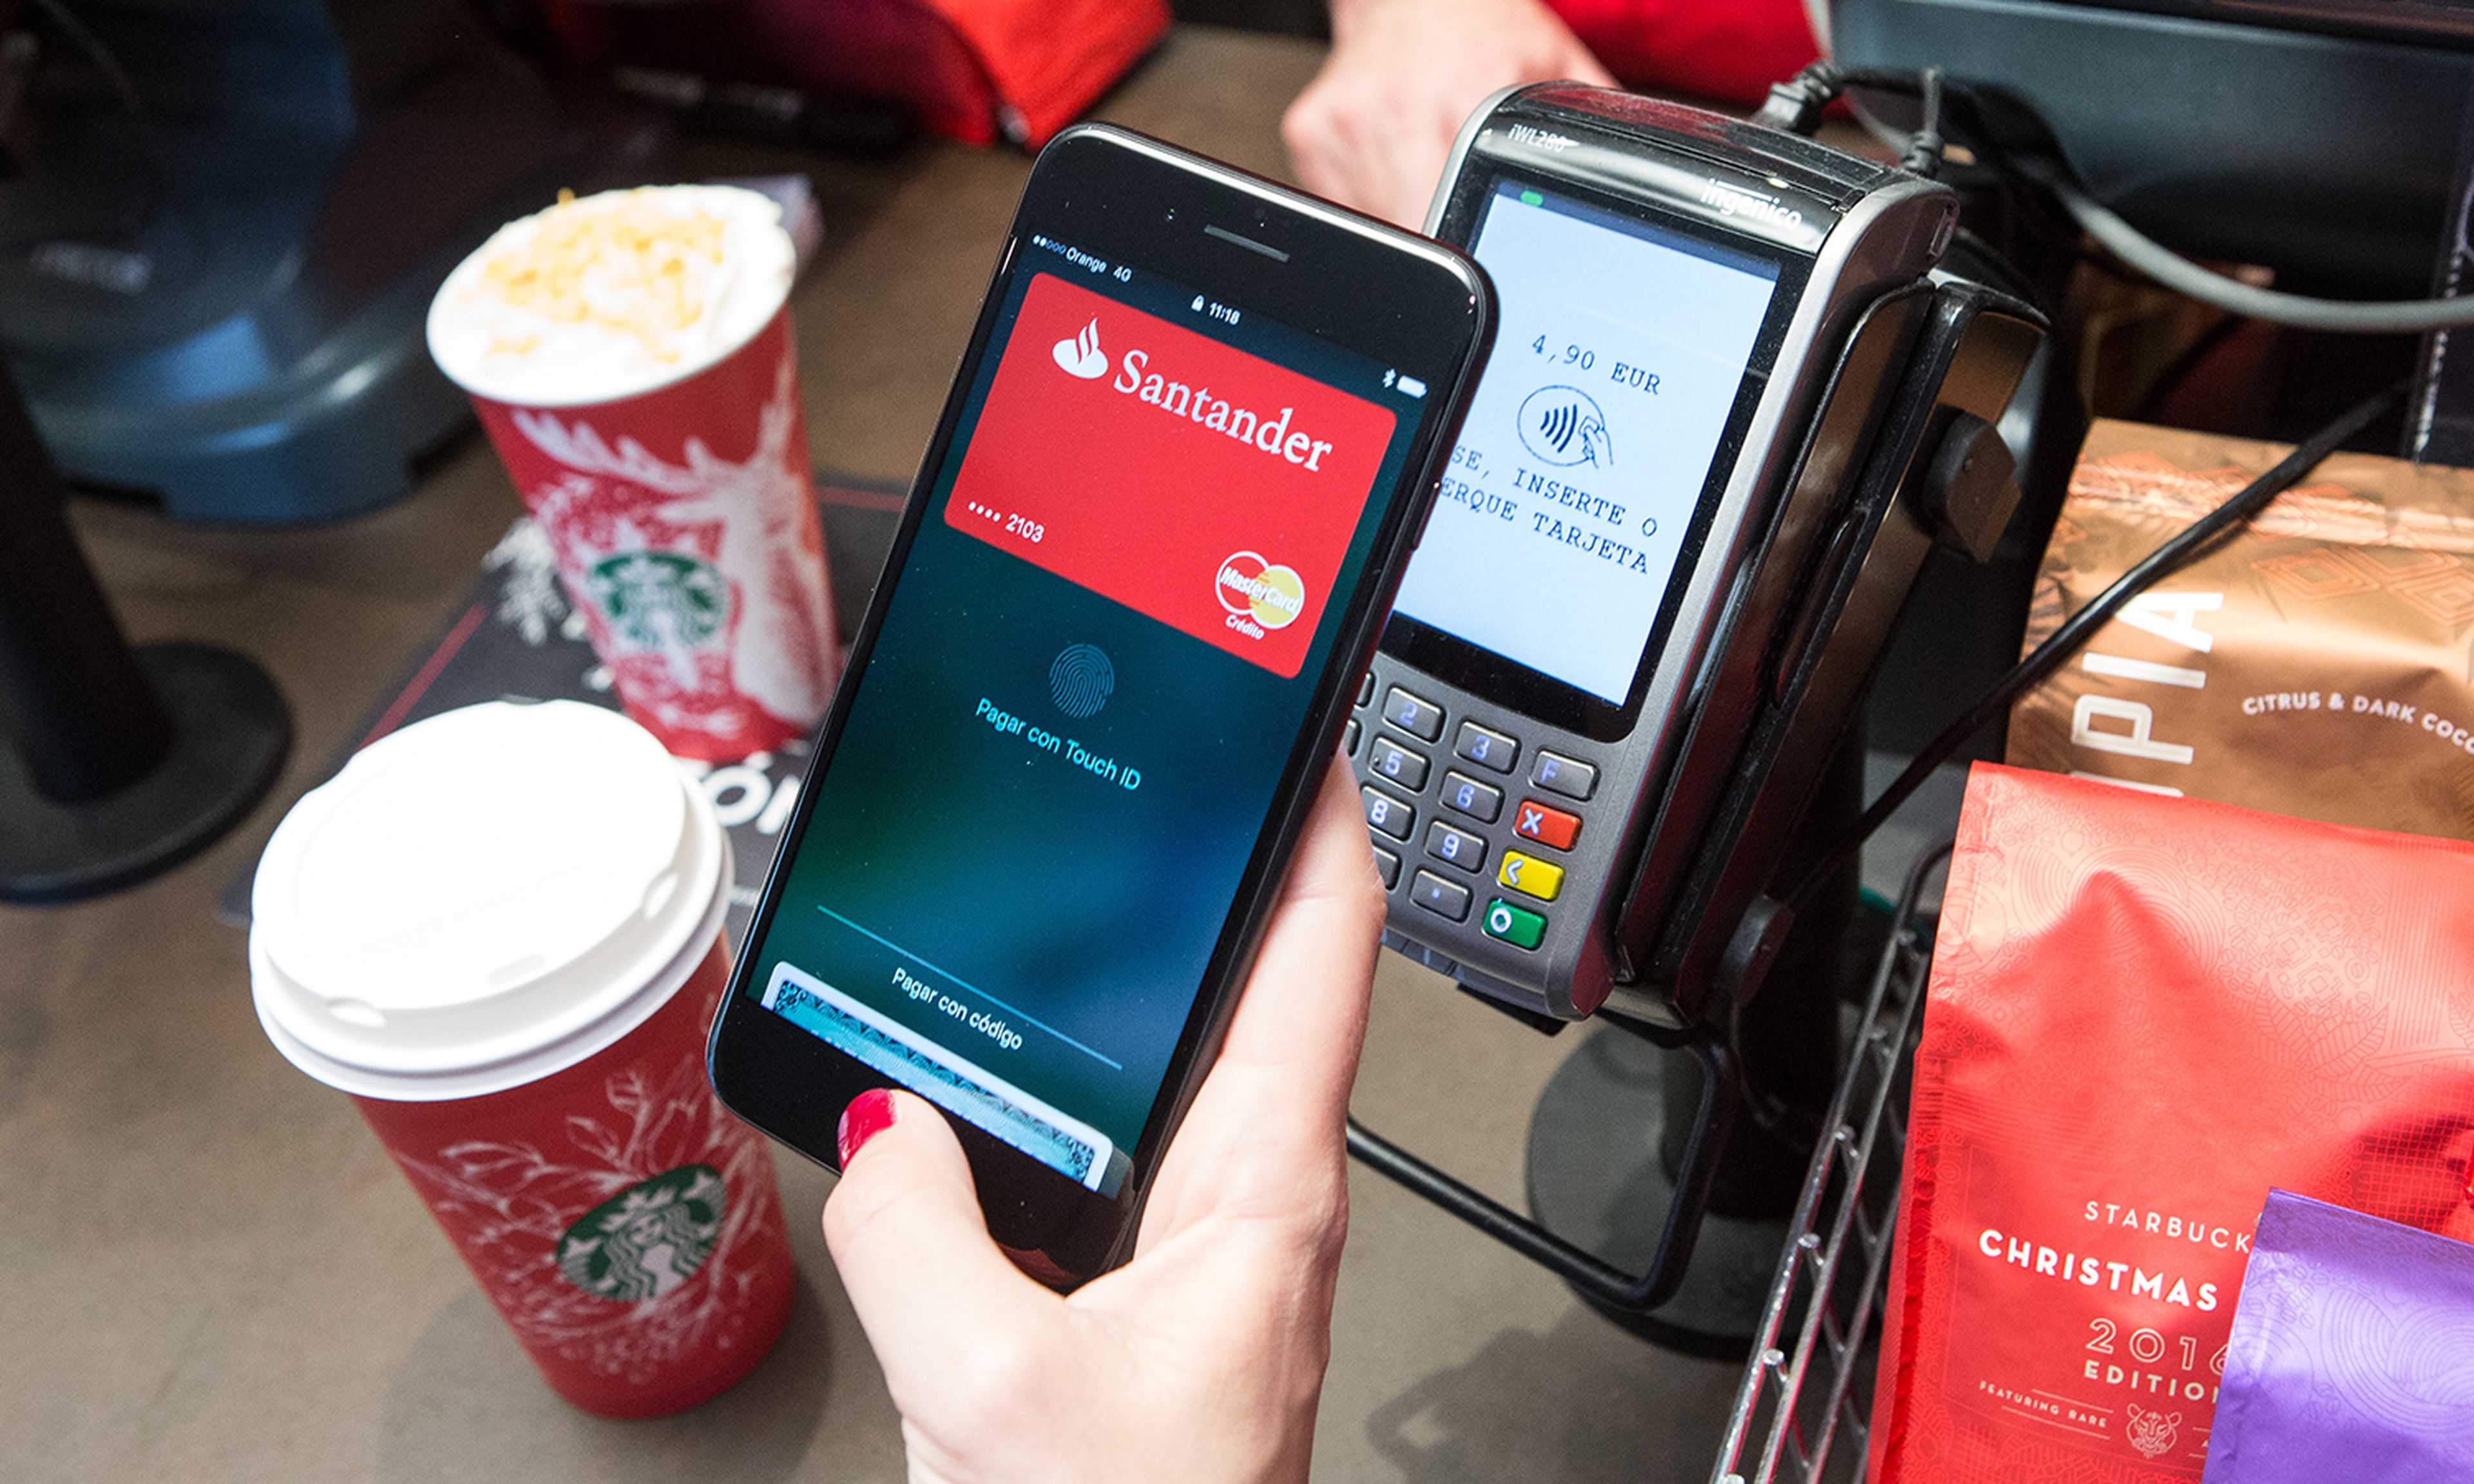 Digital financial fraud grew at a phrenetic pace during the pandemic, according to a report by financial risk management service provider Feedzai. Pictured: Apple launched Apple Pay, its mobile payment service for stores, apps and on the web in Spain on Nov. 30, 2016, in Madrid, Spain. (Photo by Pablo Cuadra/Getty Images for Apple)